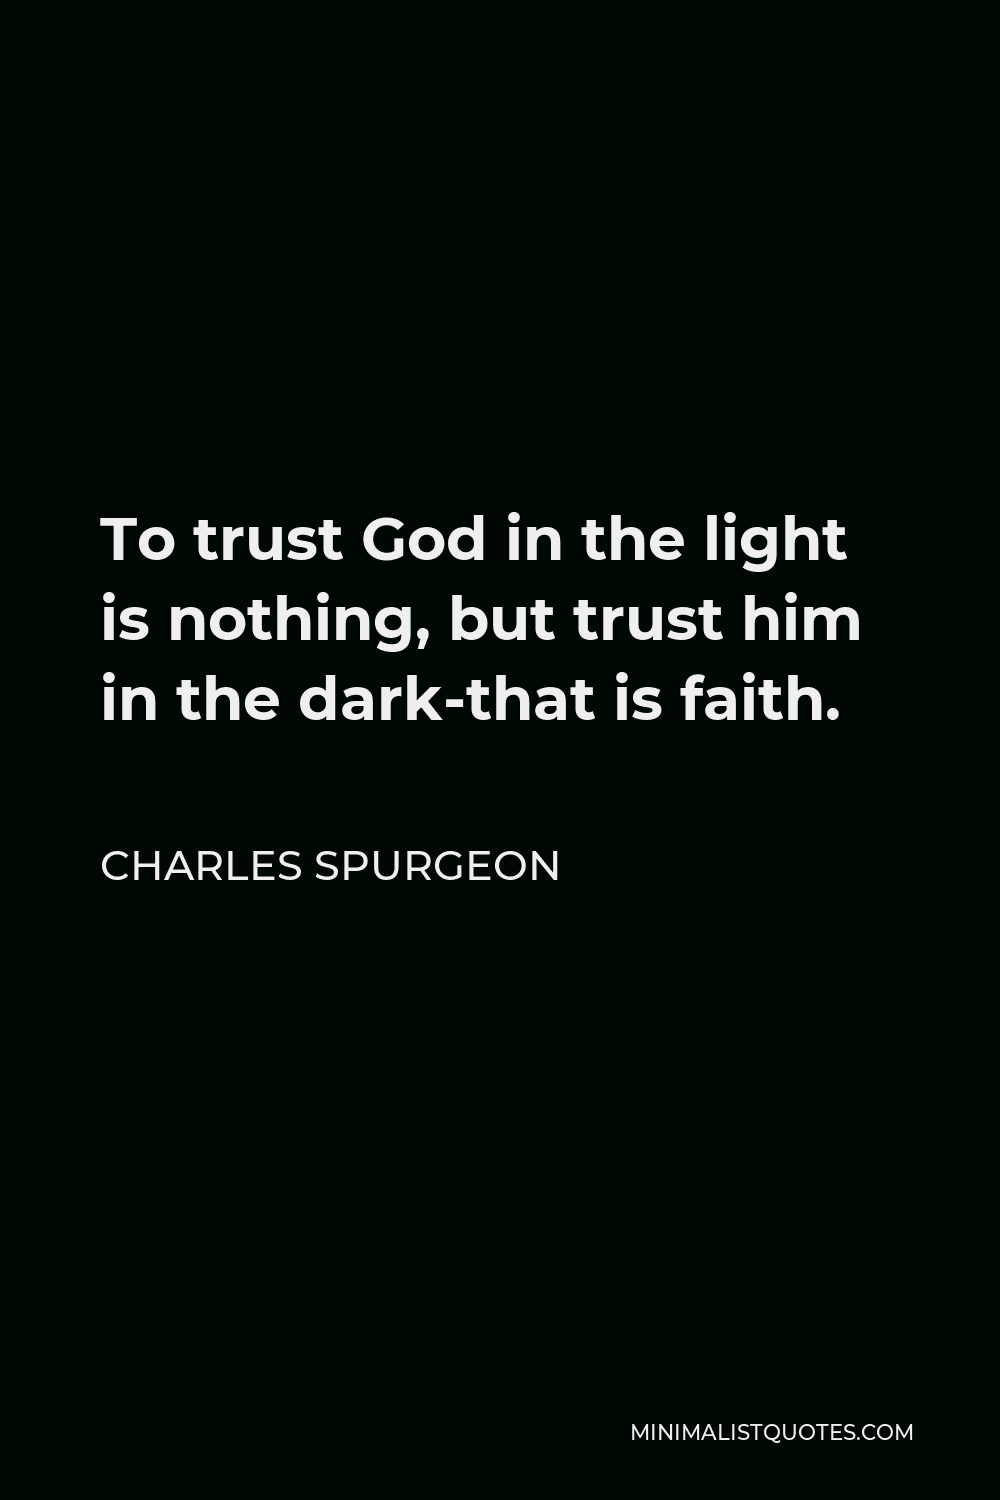 Charles Spurgeon Quote: To trust God in the light is nothing, but ...